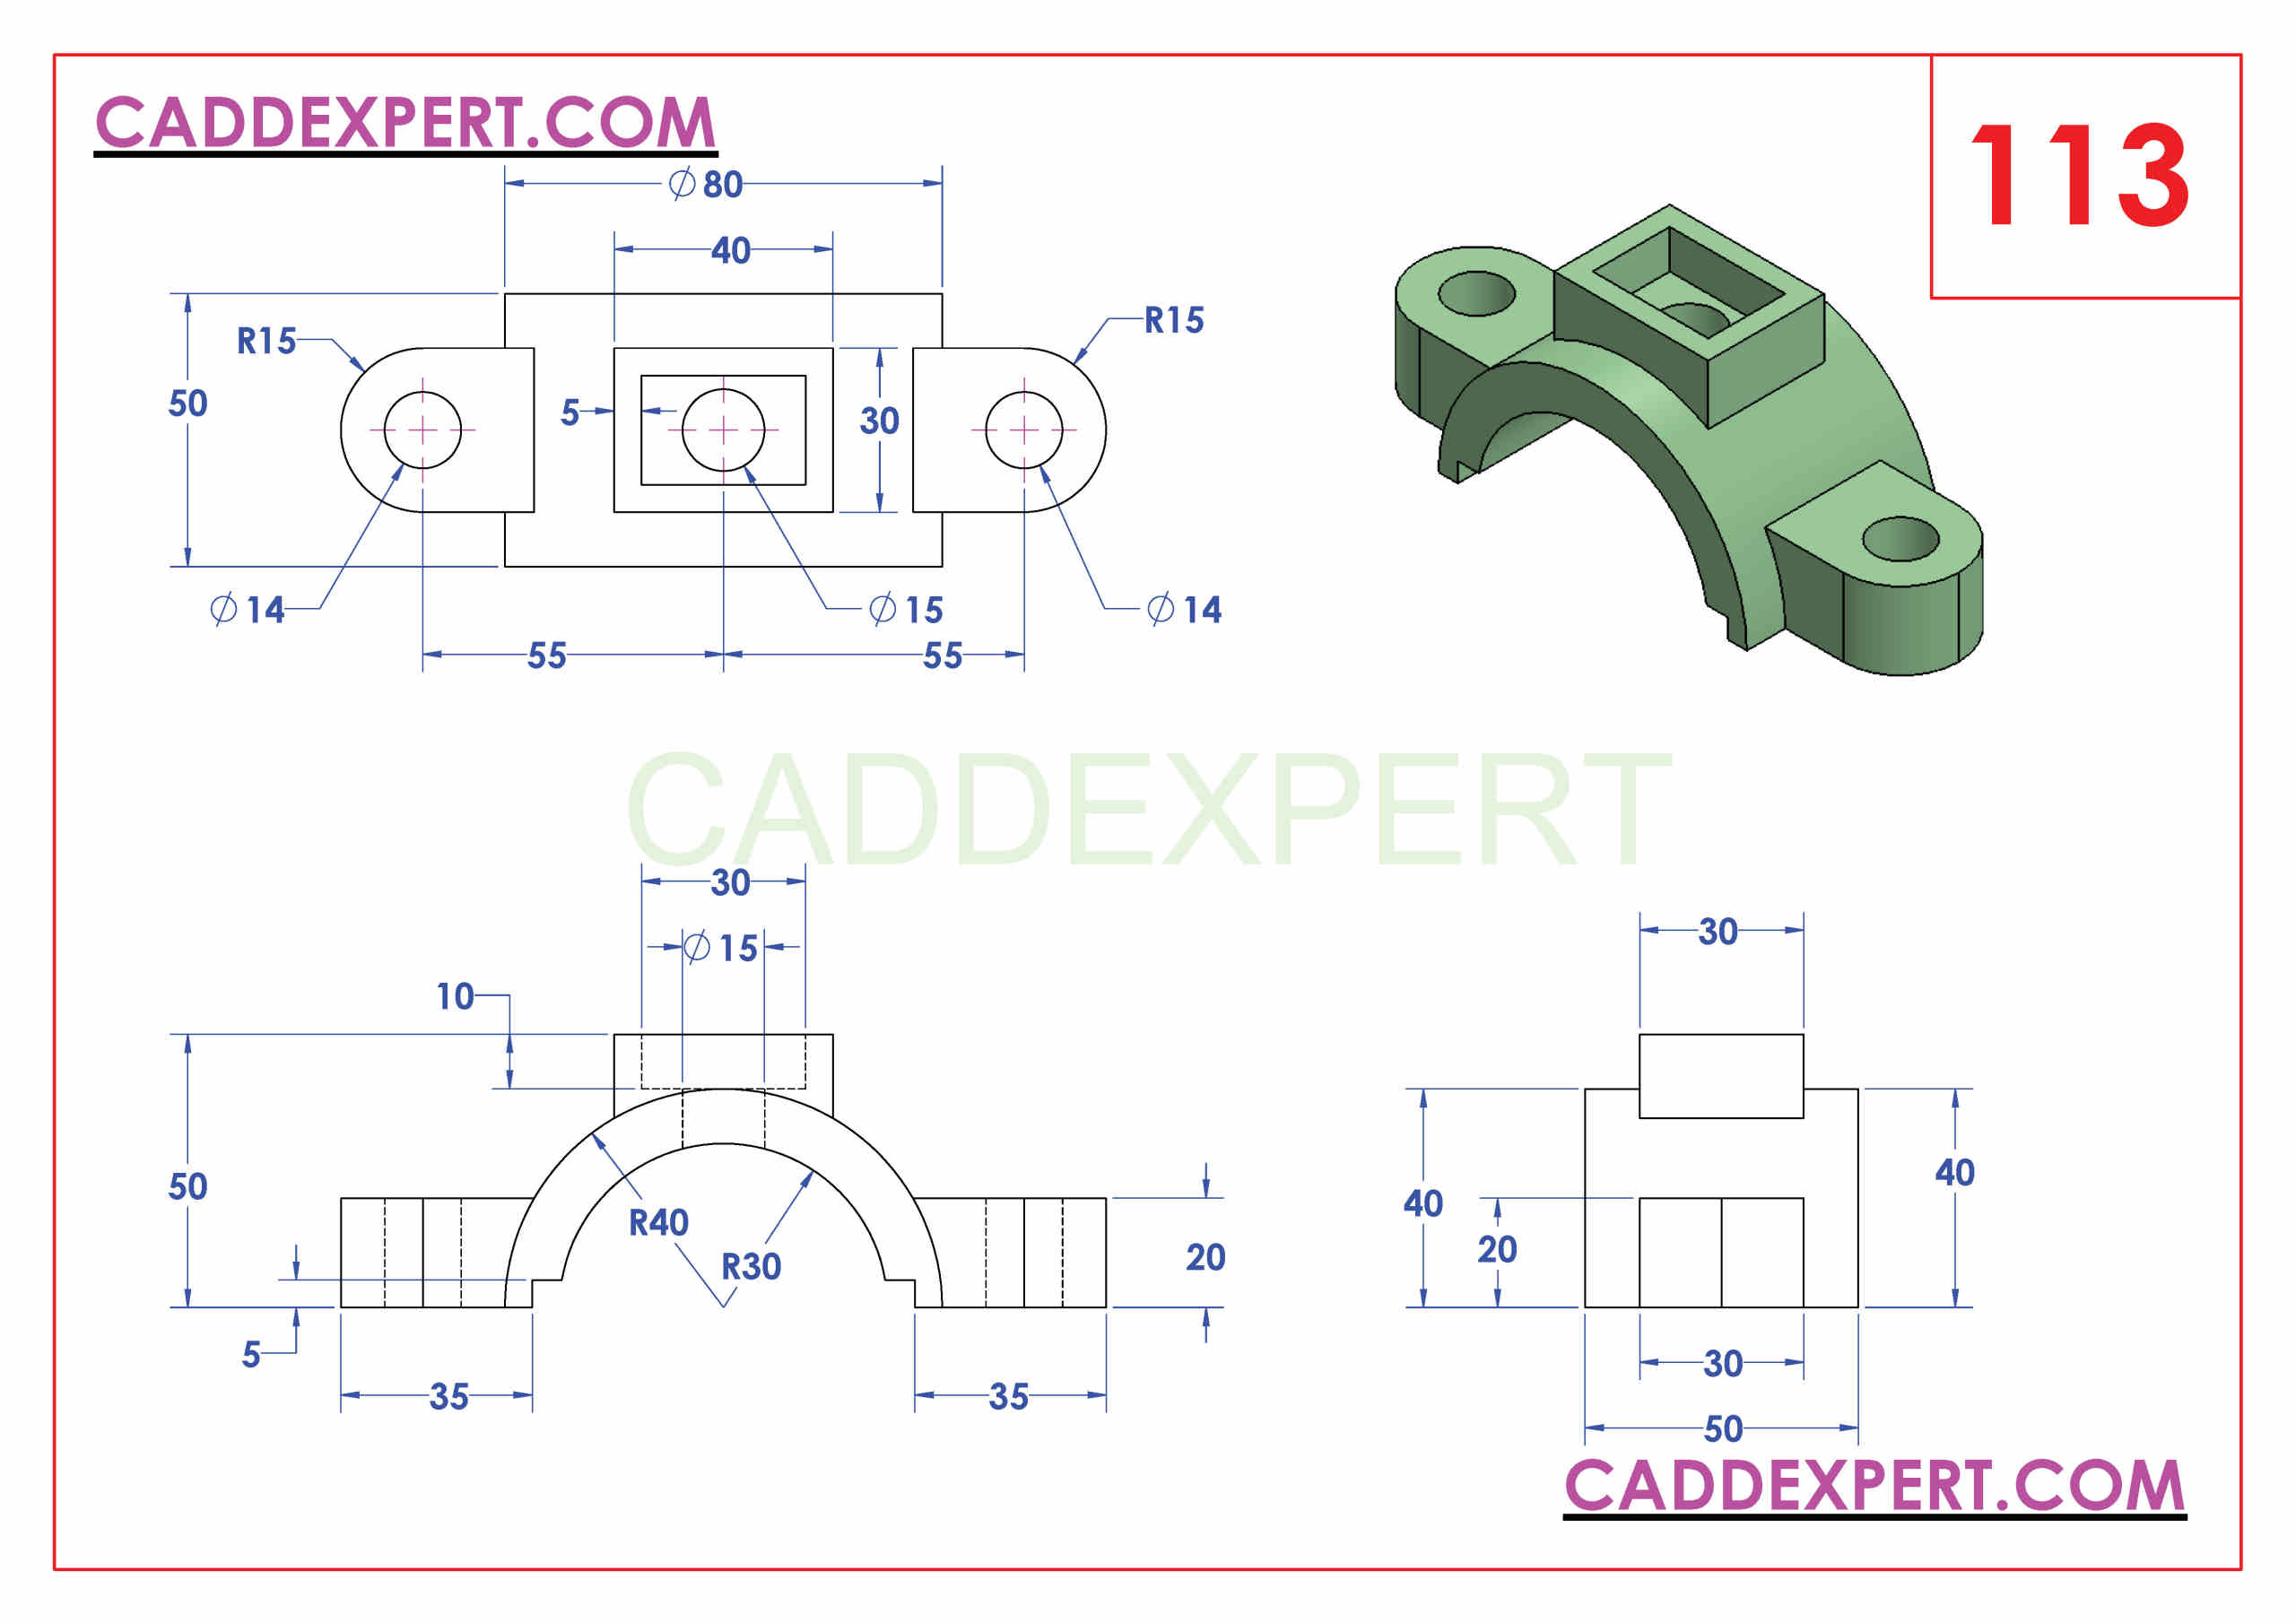 solidworks exercises pdf free download